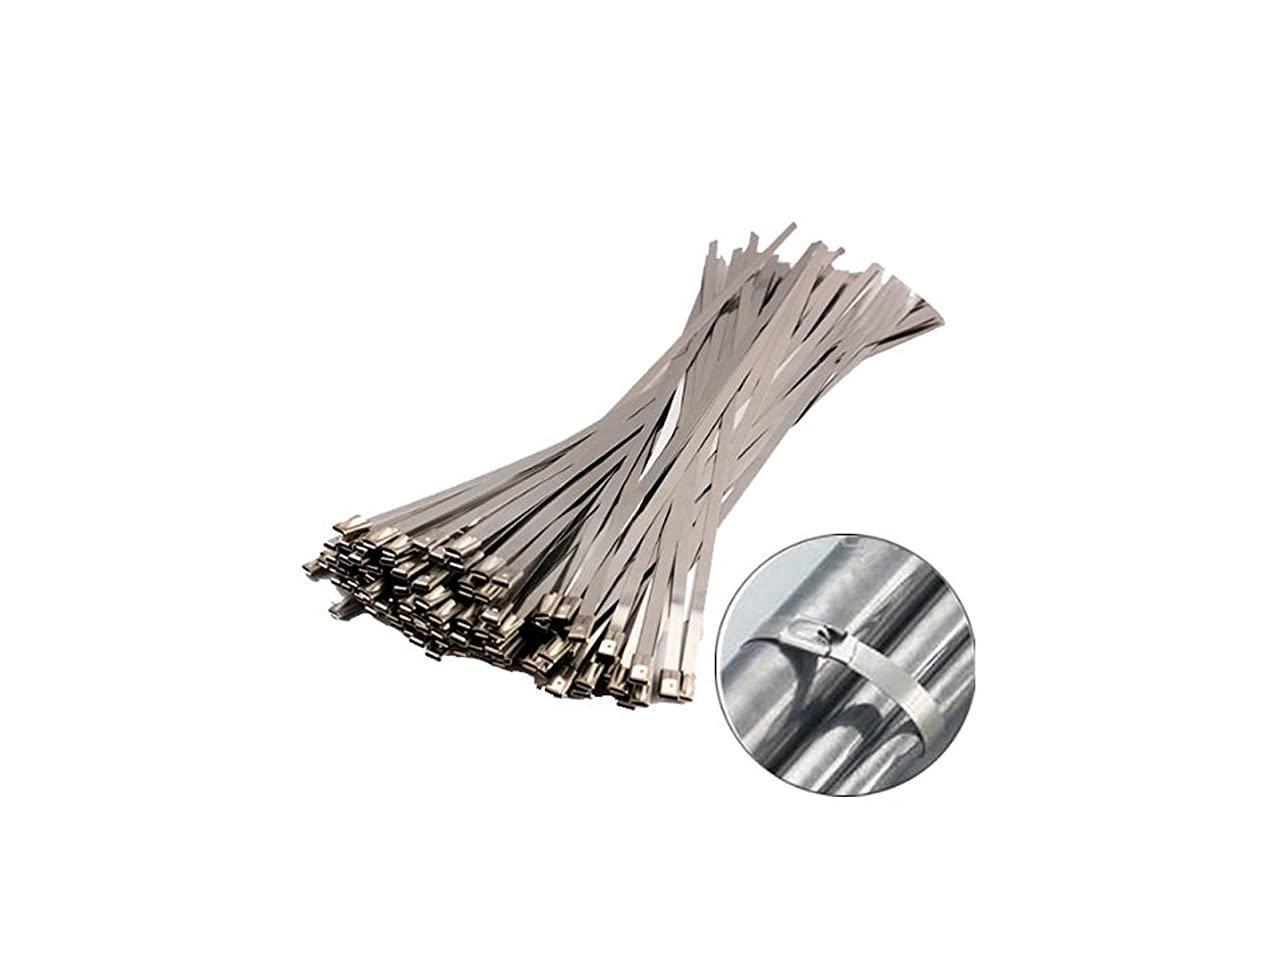 High Quality Stainless Steel Heat Wrap Locking Tightening Tool Cable Zip Ties 